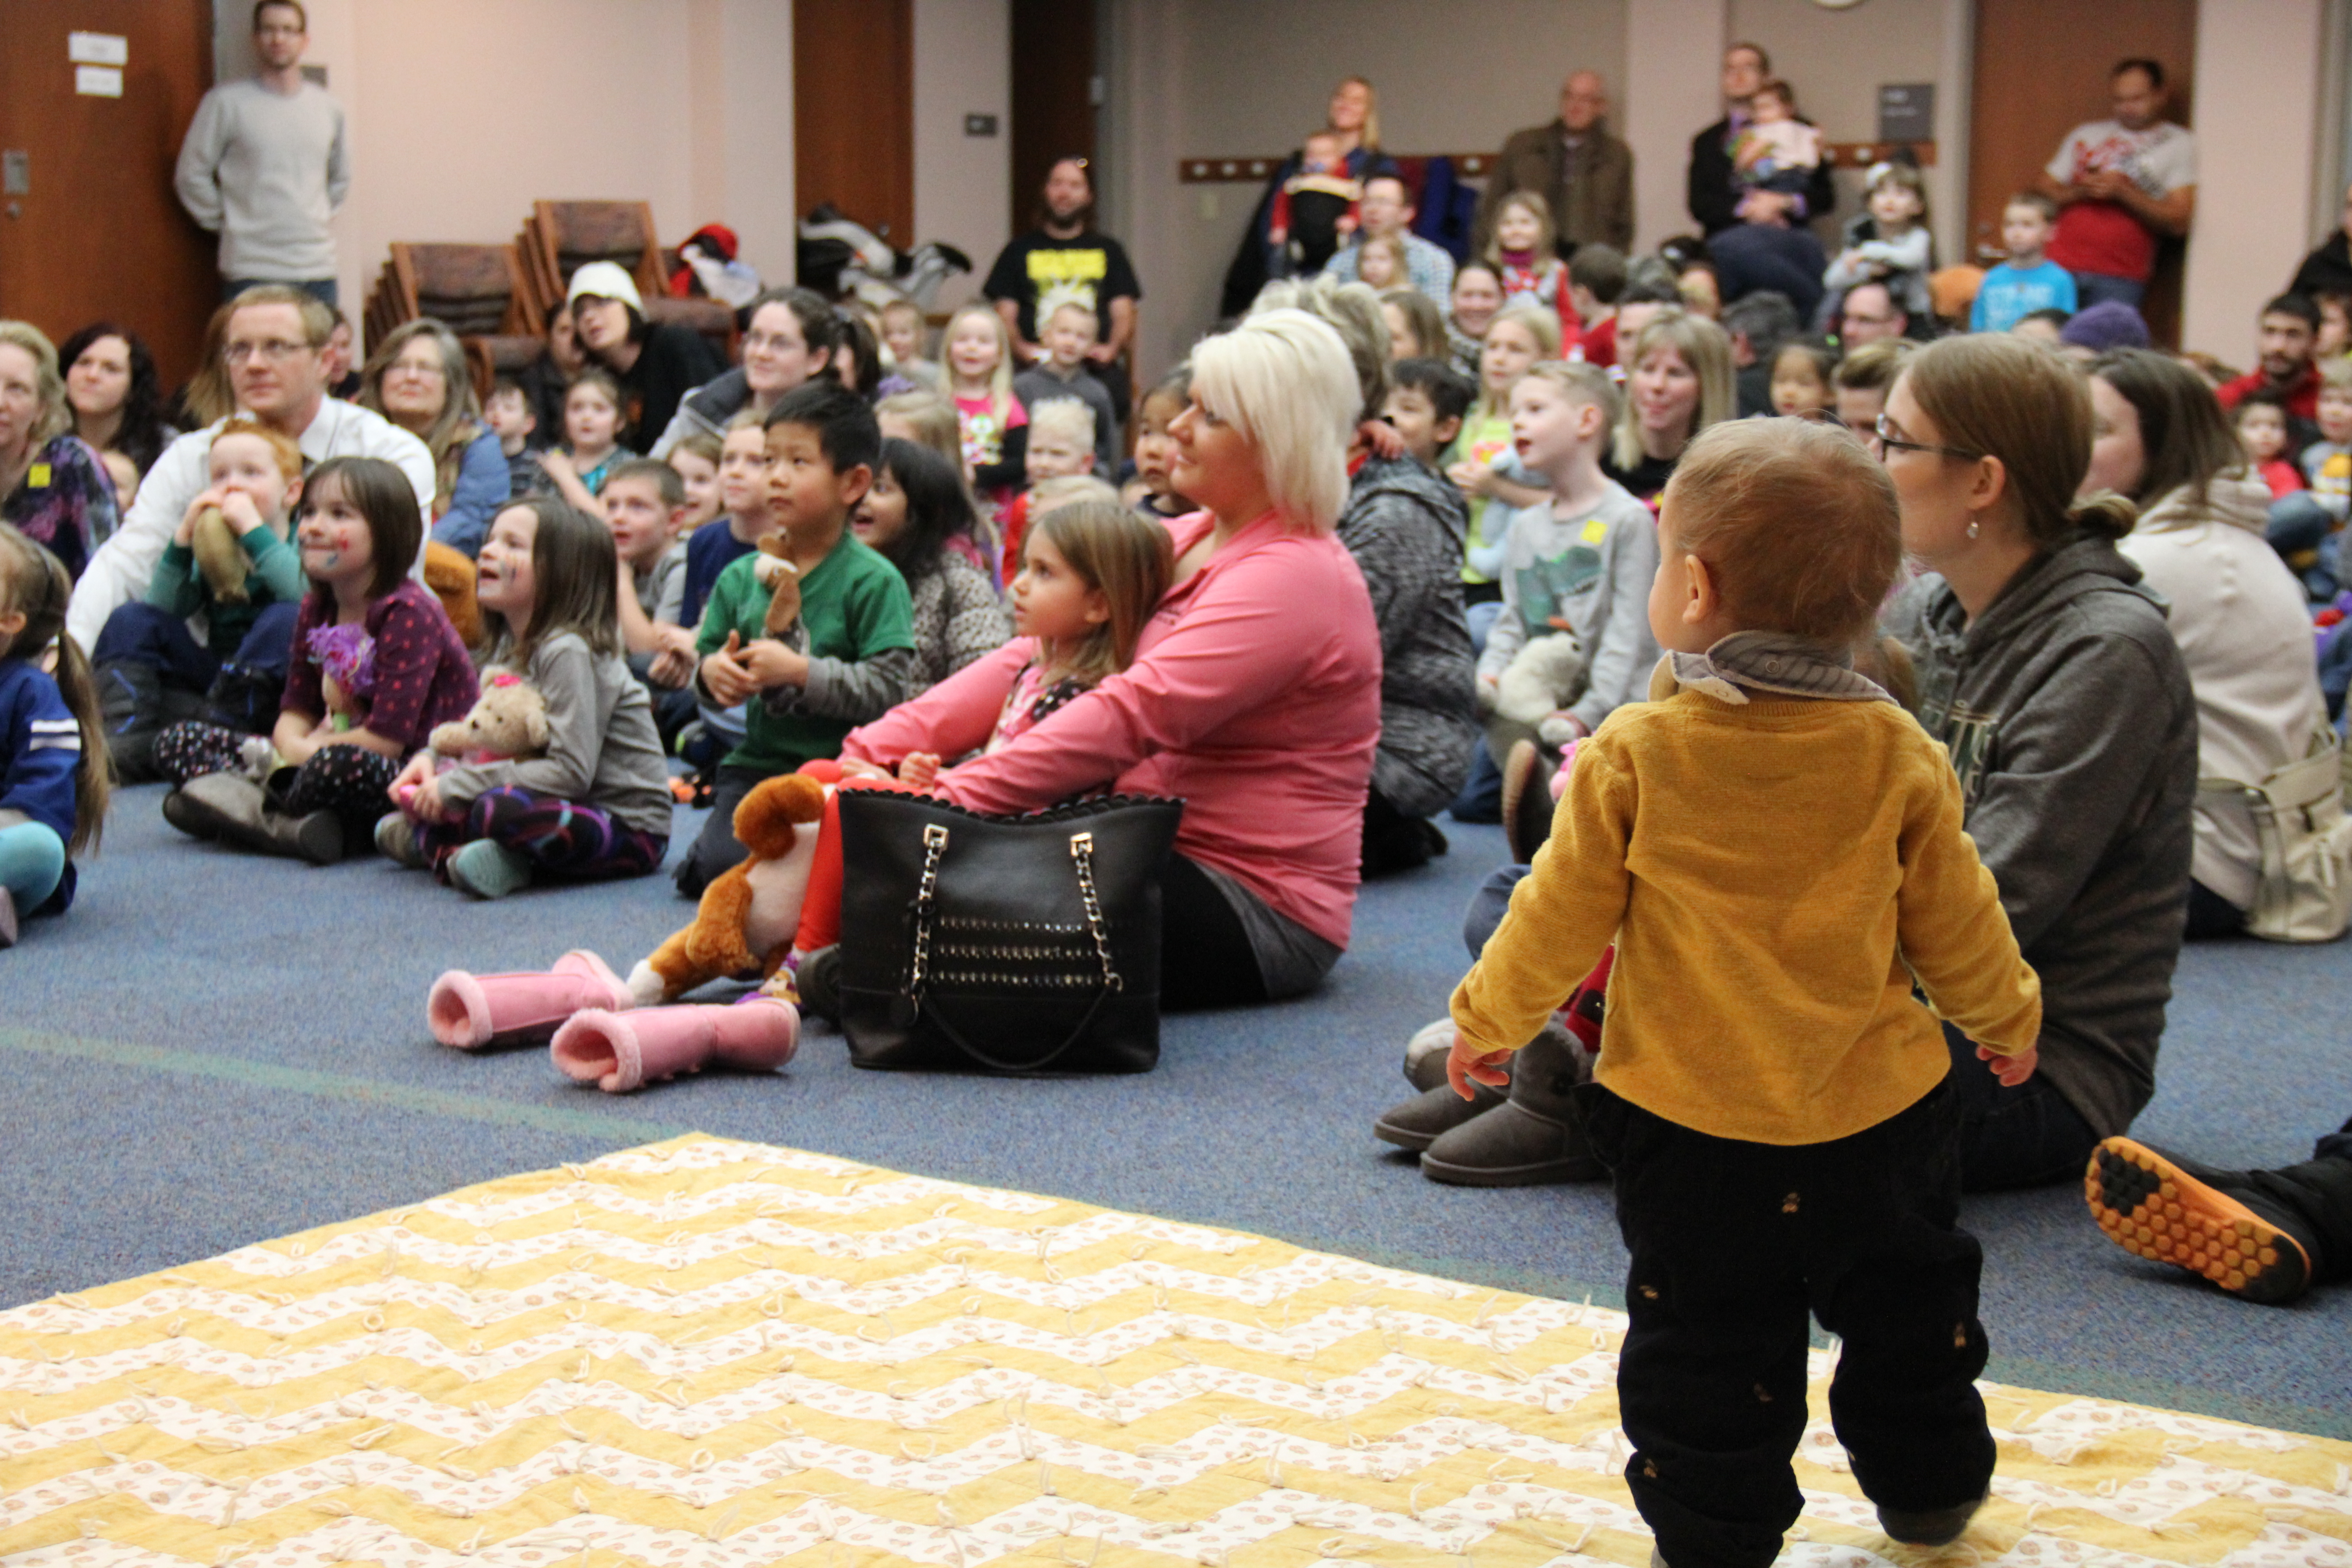 Large room with adults and children watching presenter read. 